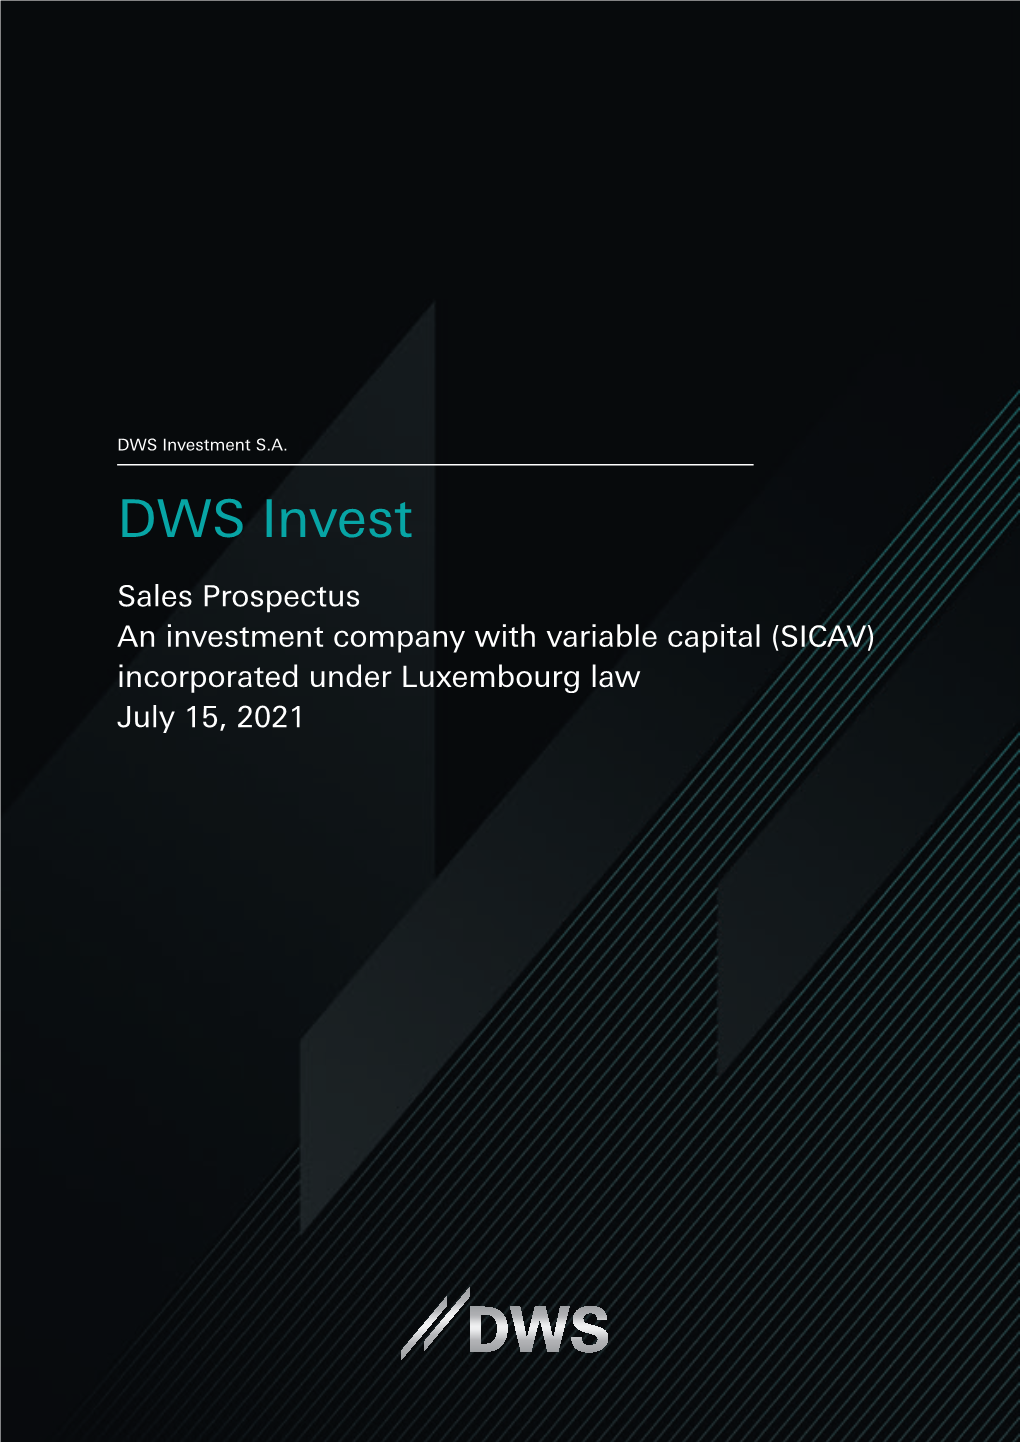 DWS Investment S.A